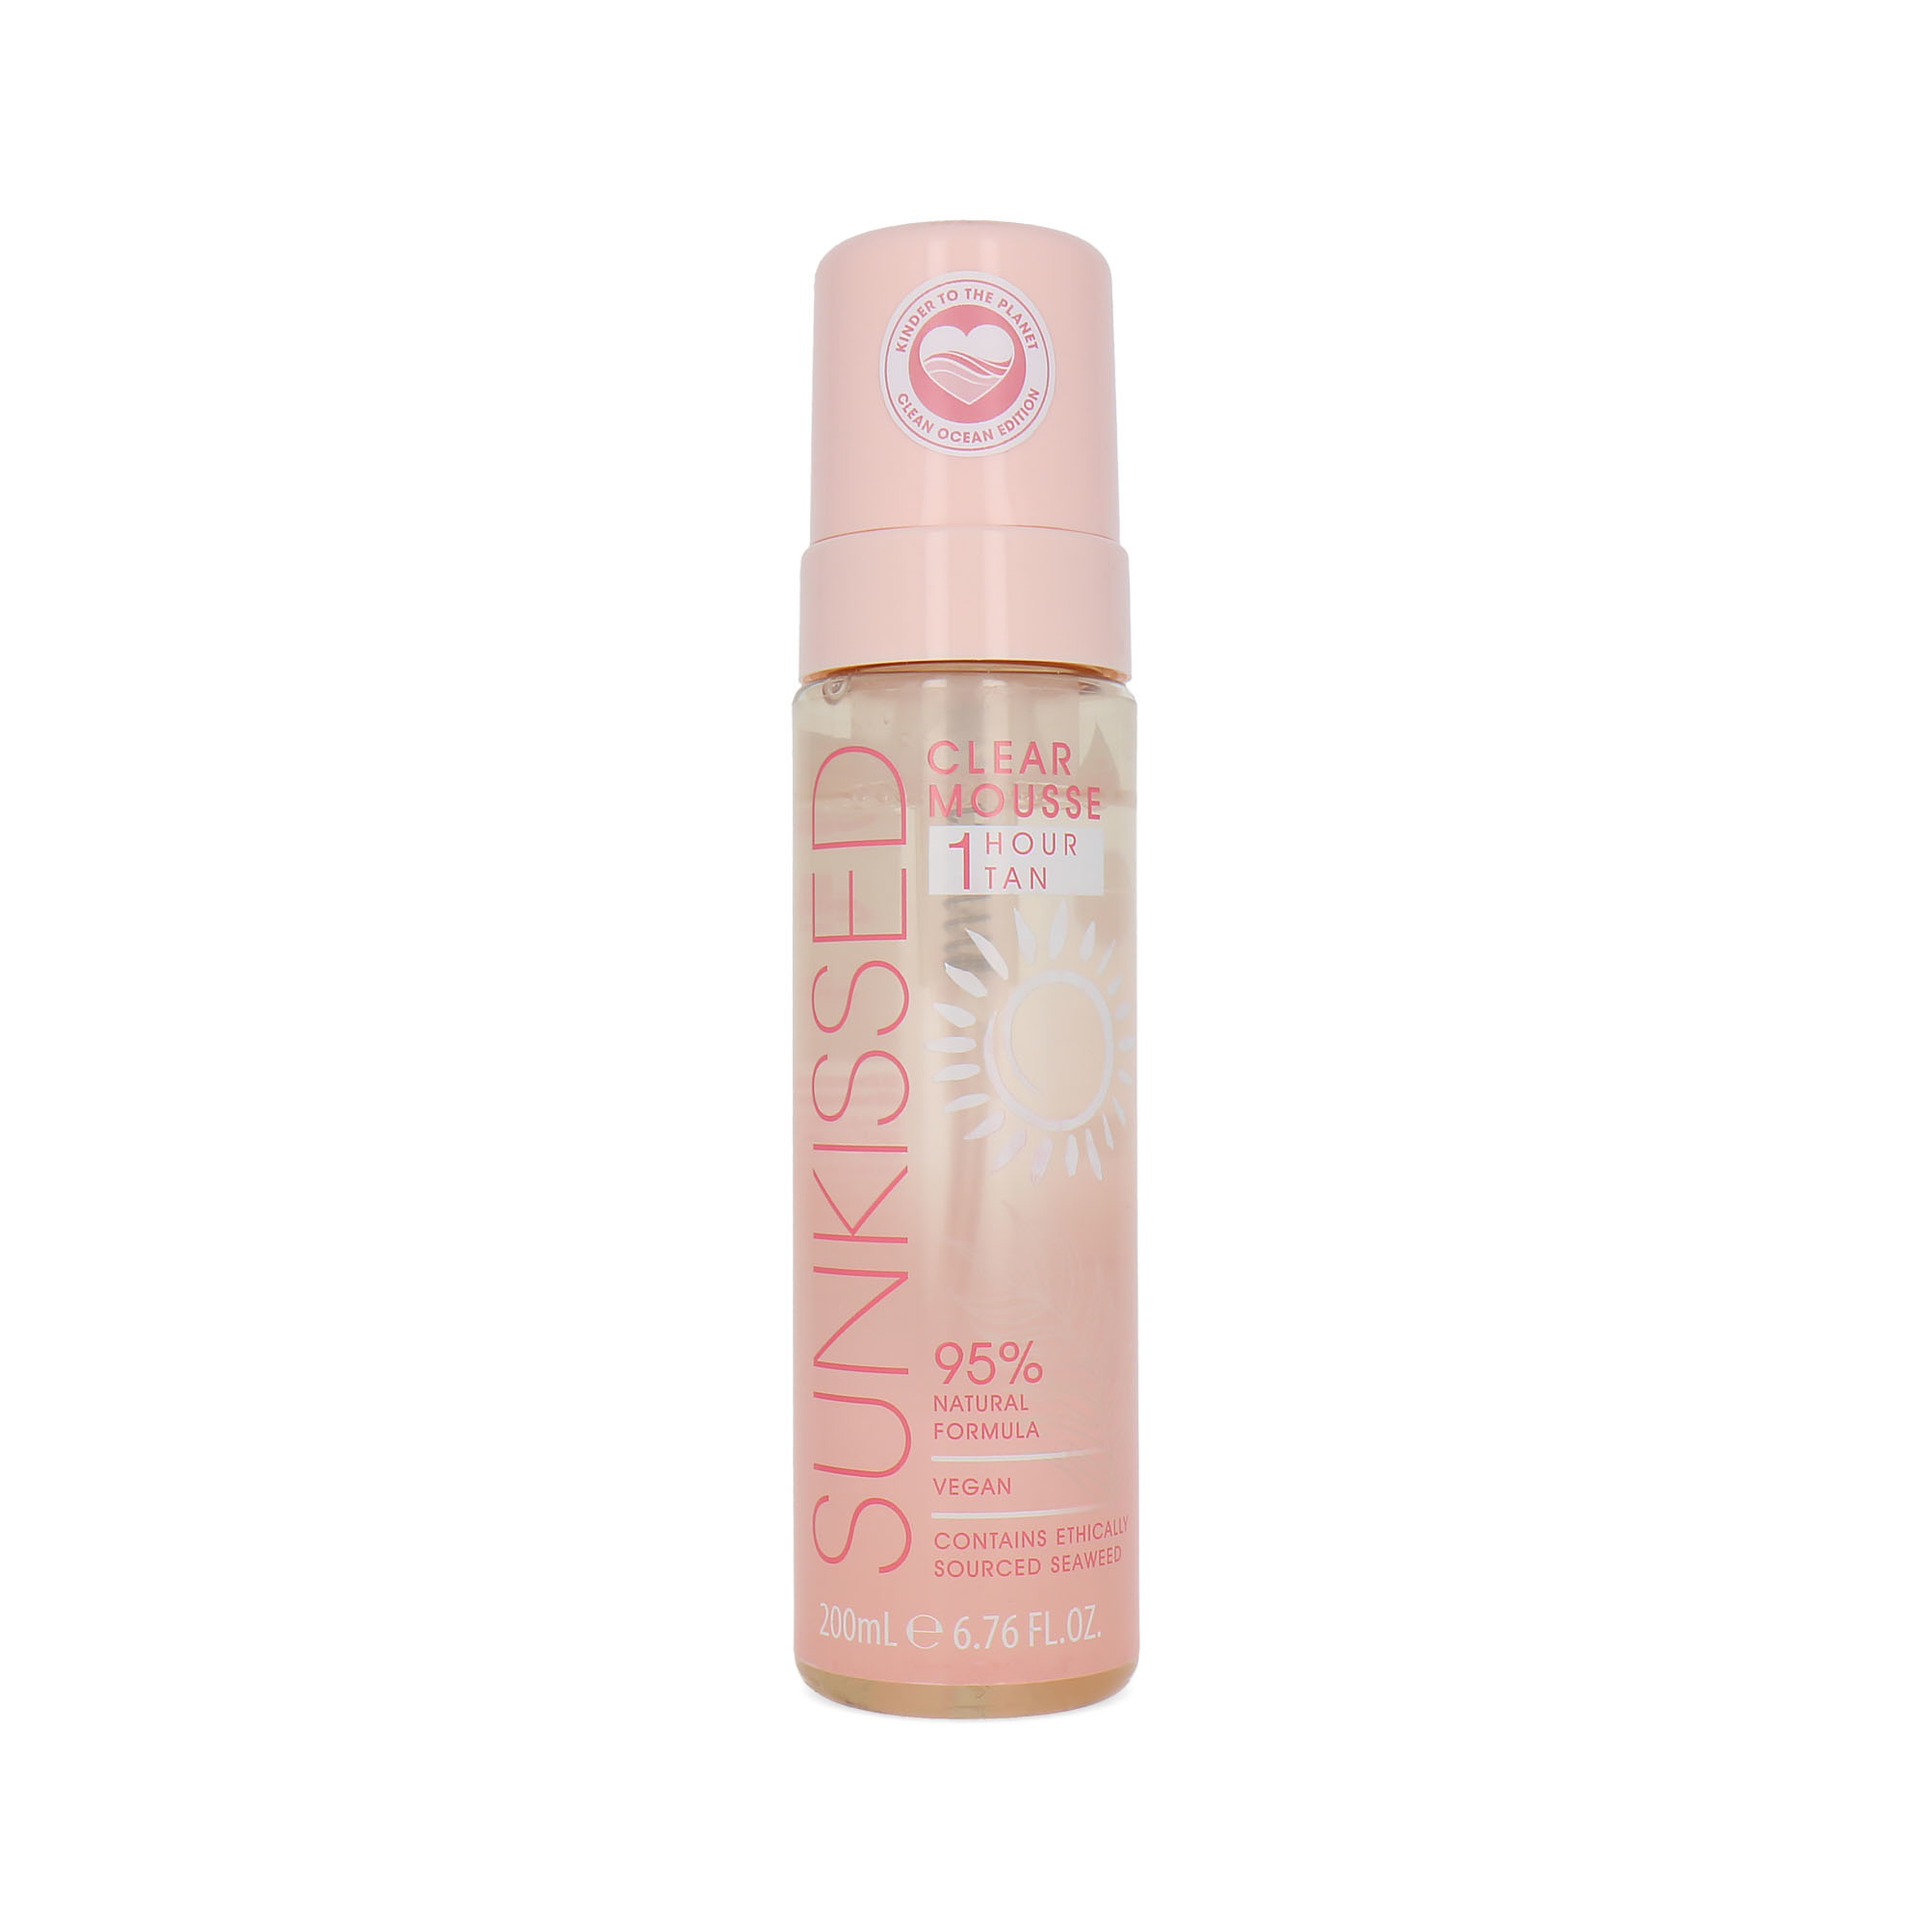 Sunkissed Clear Mousse 1 Hour Tan Ocean Edition - 200 ml